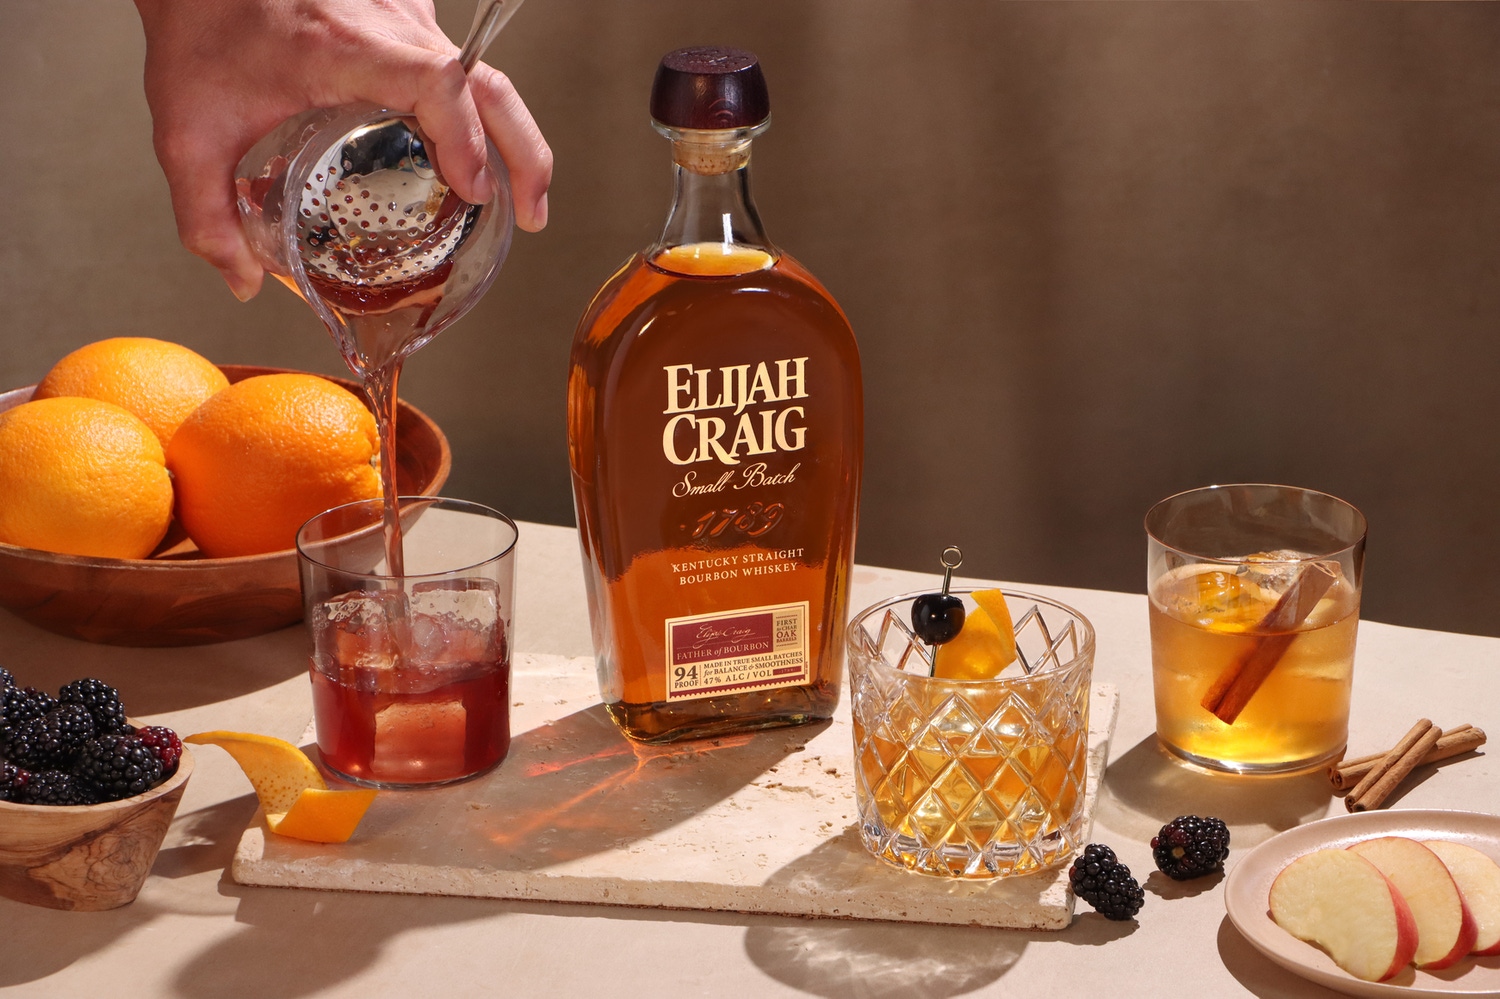 A table set up with cocktail ingredients to prepare an Elijah Craig bourbon Old Fashioned.